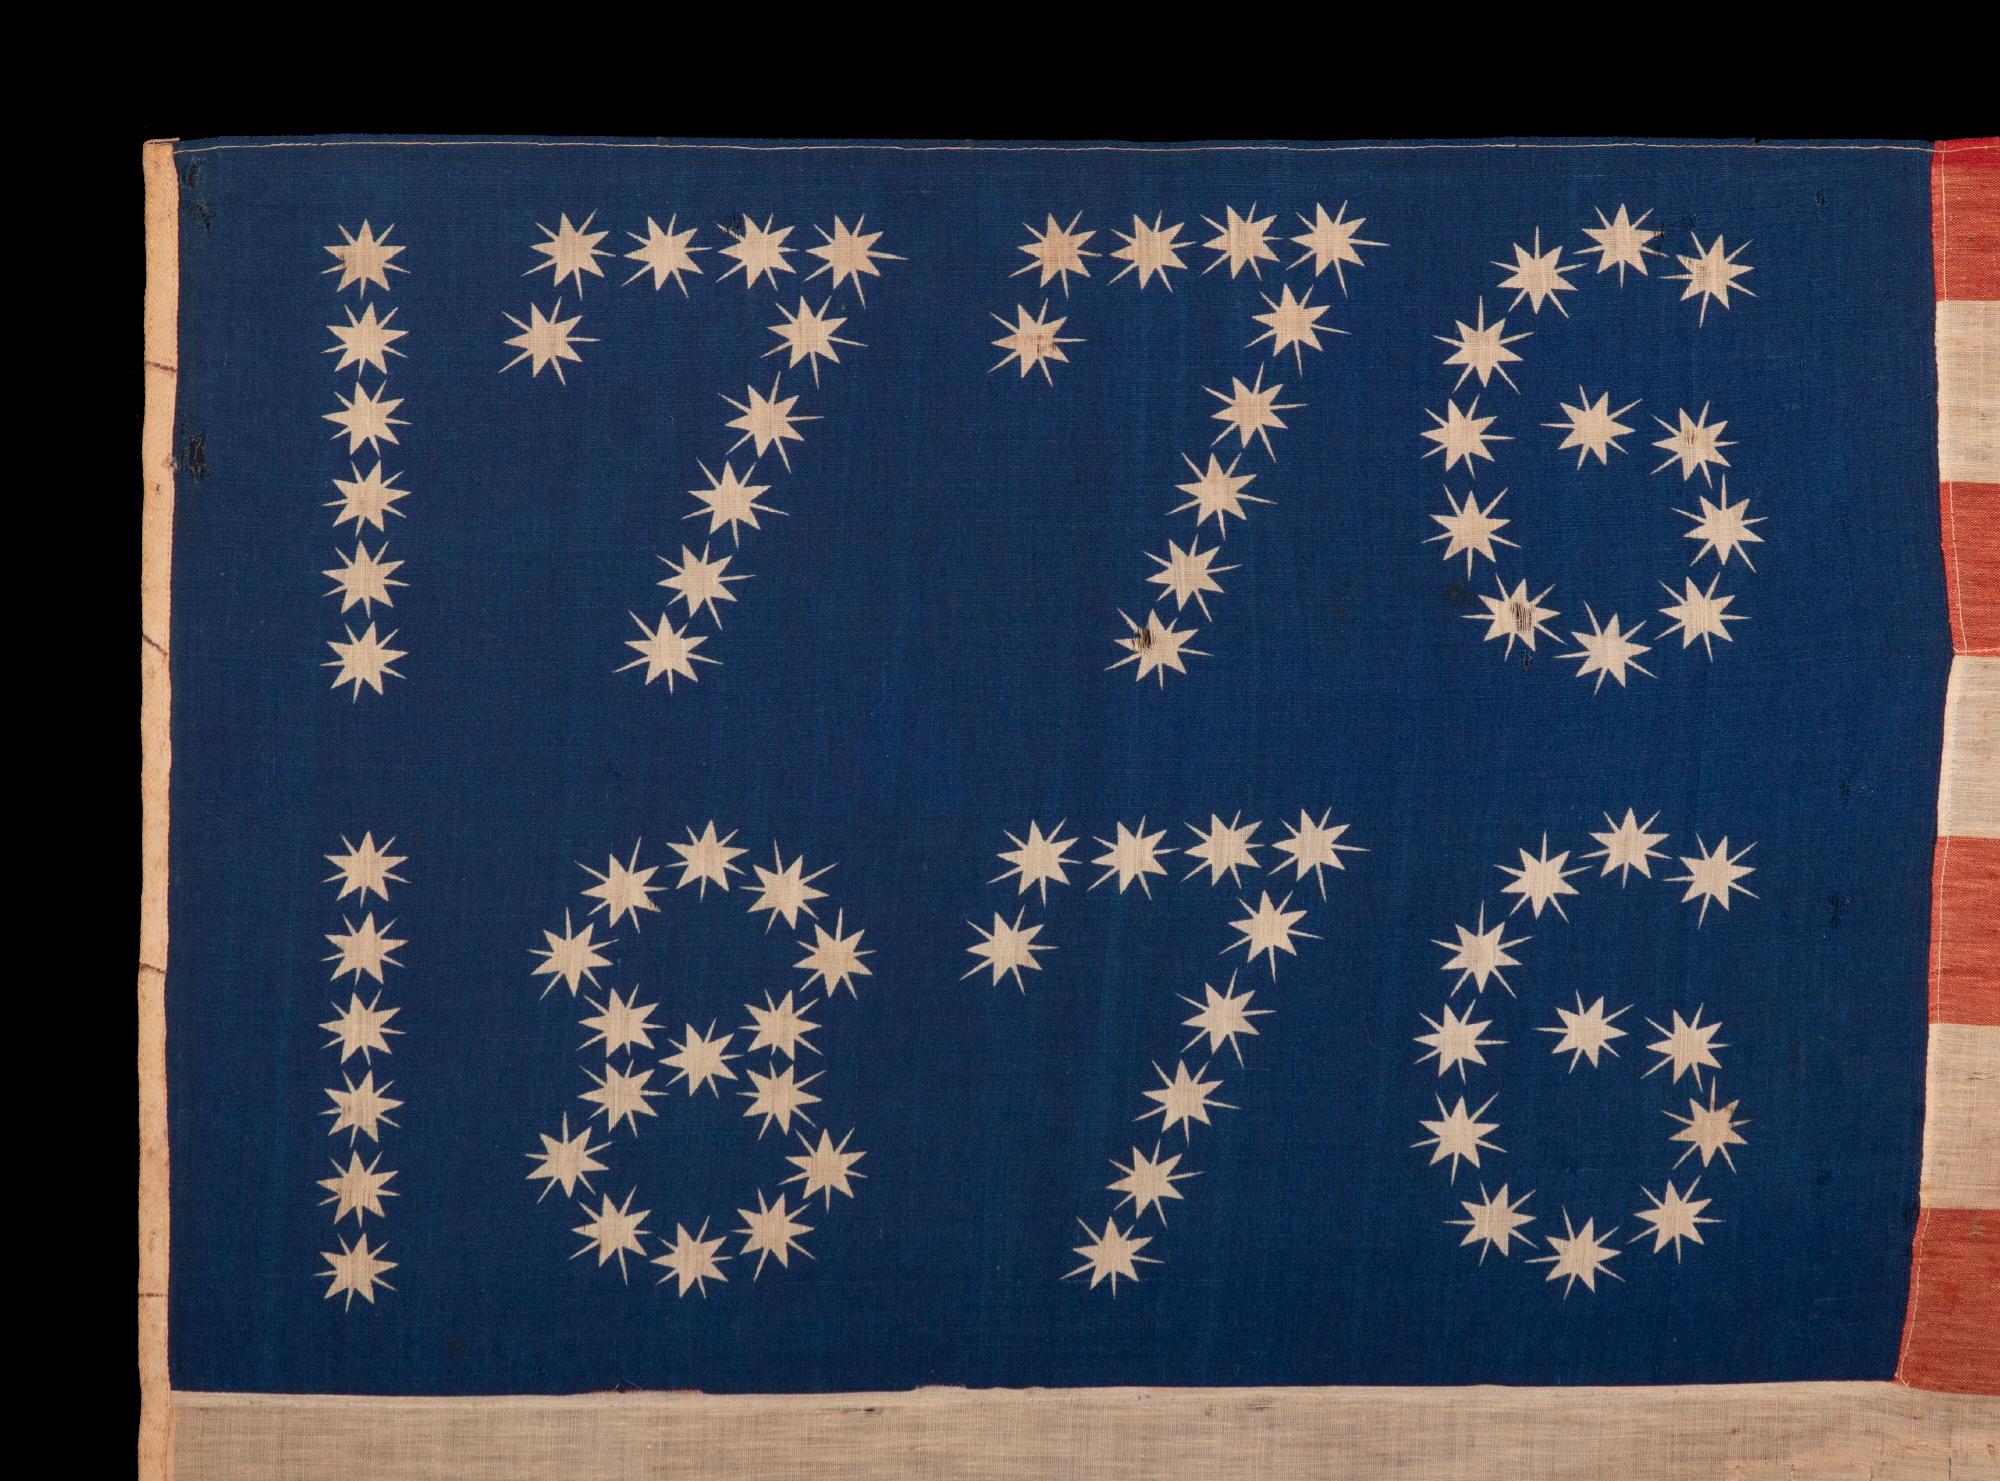 Antique American Flag with 10-pointed stars that spell “1776 – 1876”, Made for the 100-Year Anniversary Of American Independence,one of the most graphic of all early examples.

Many fantastic star patterns were made in the patriotism that